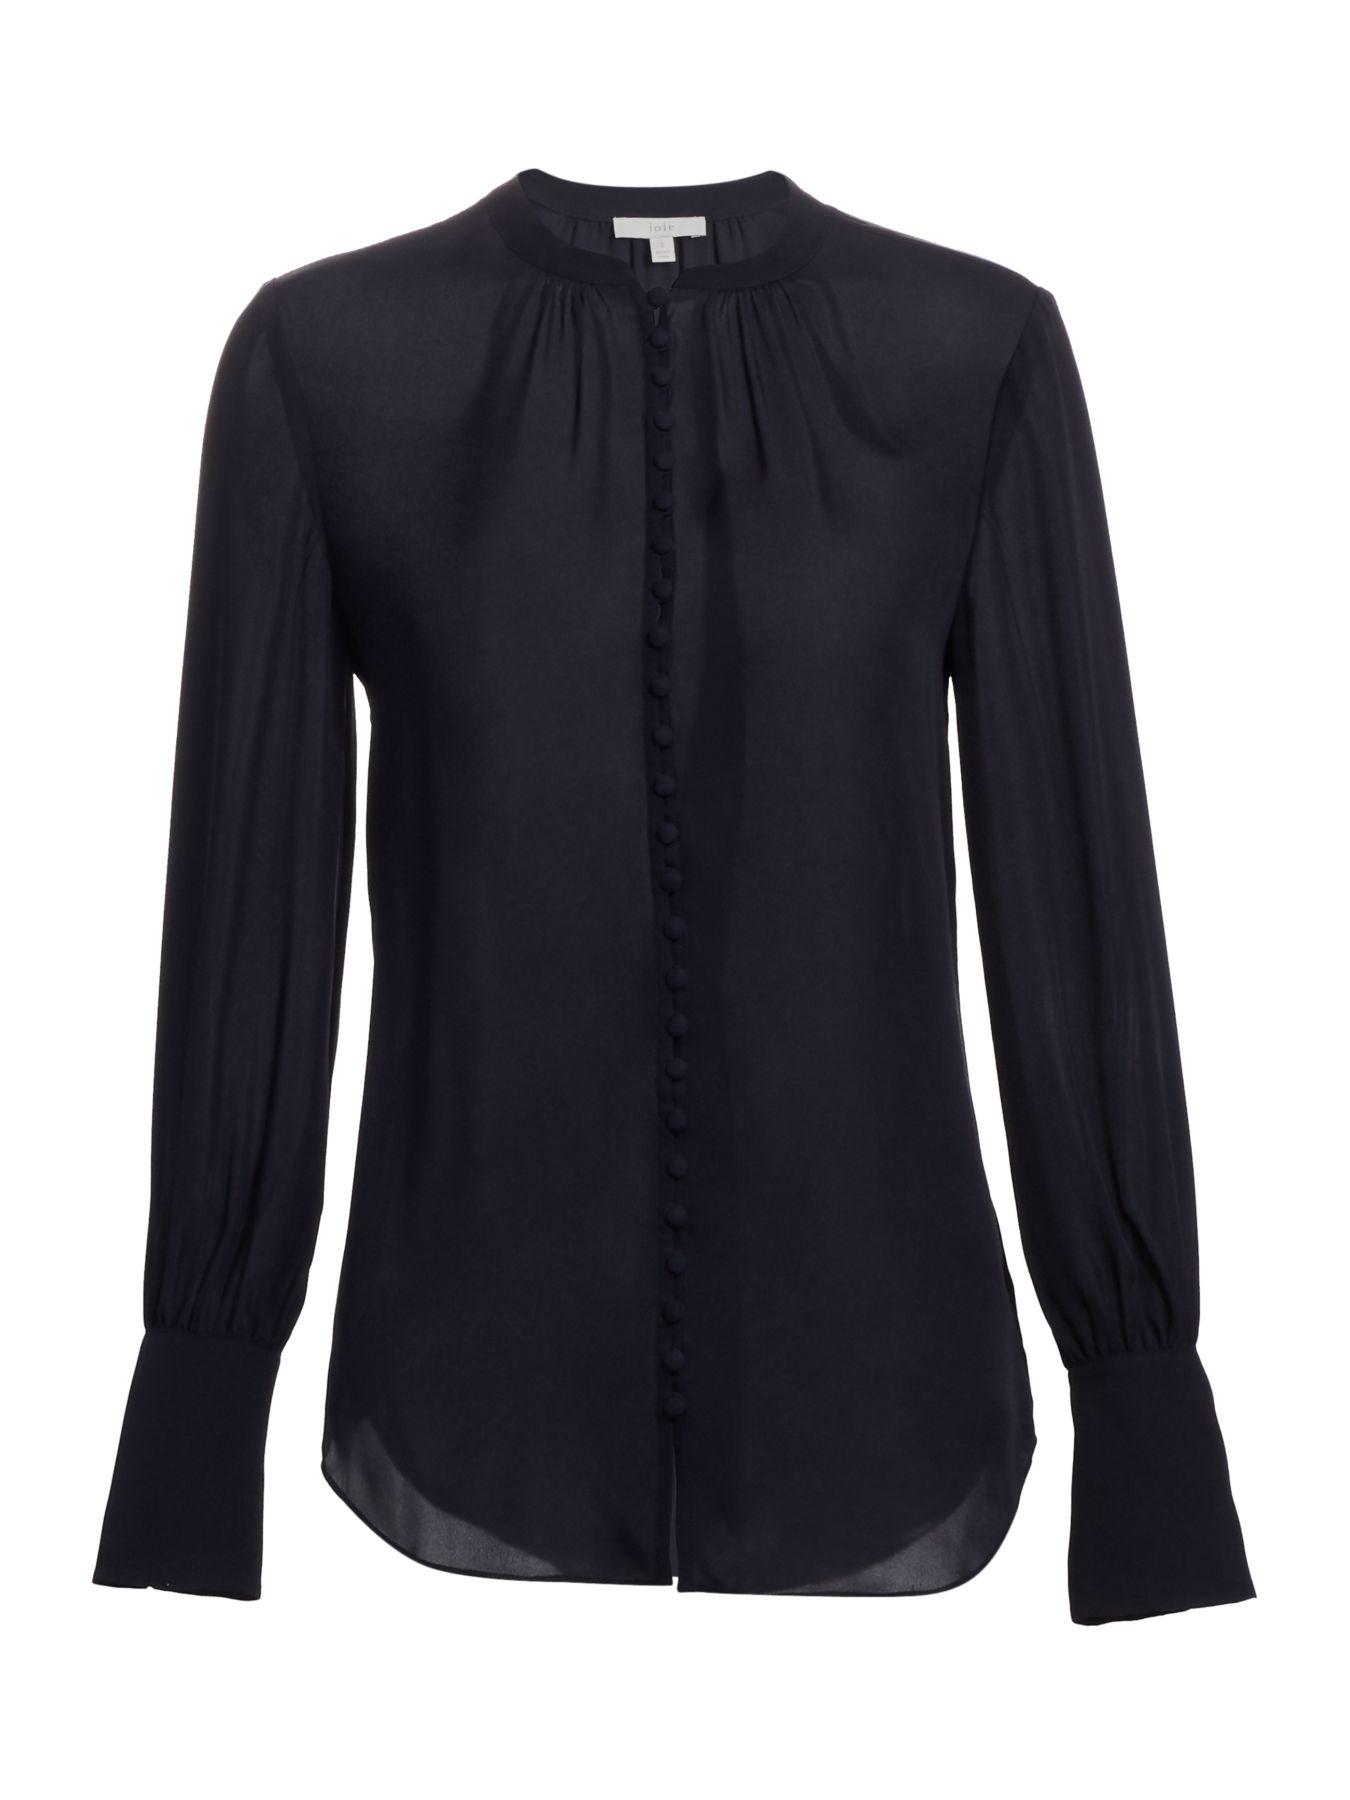 Joie Synthetic Tariana Flared Cuff Blouse in Midnight (Blue) - Lyst